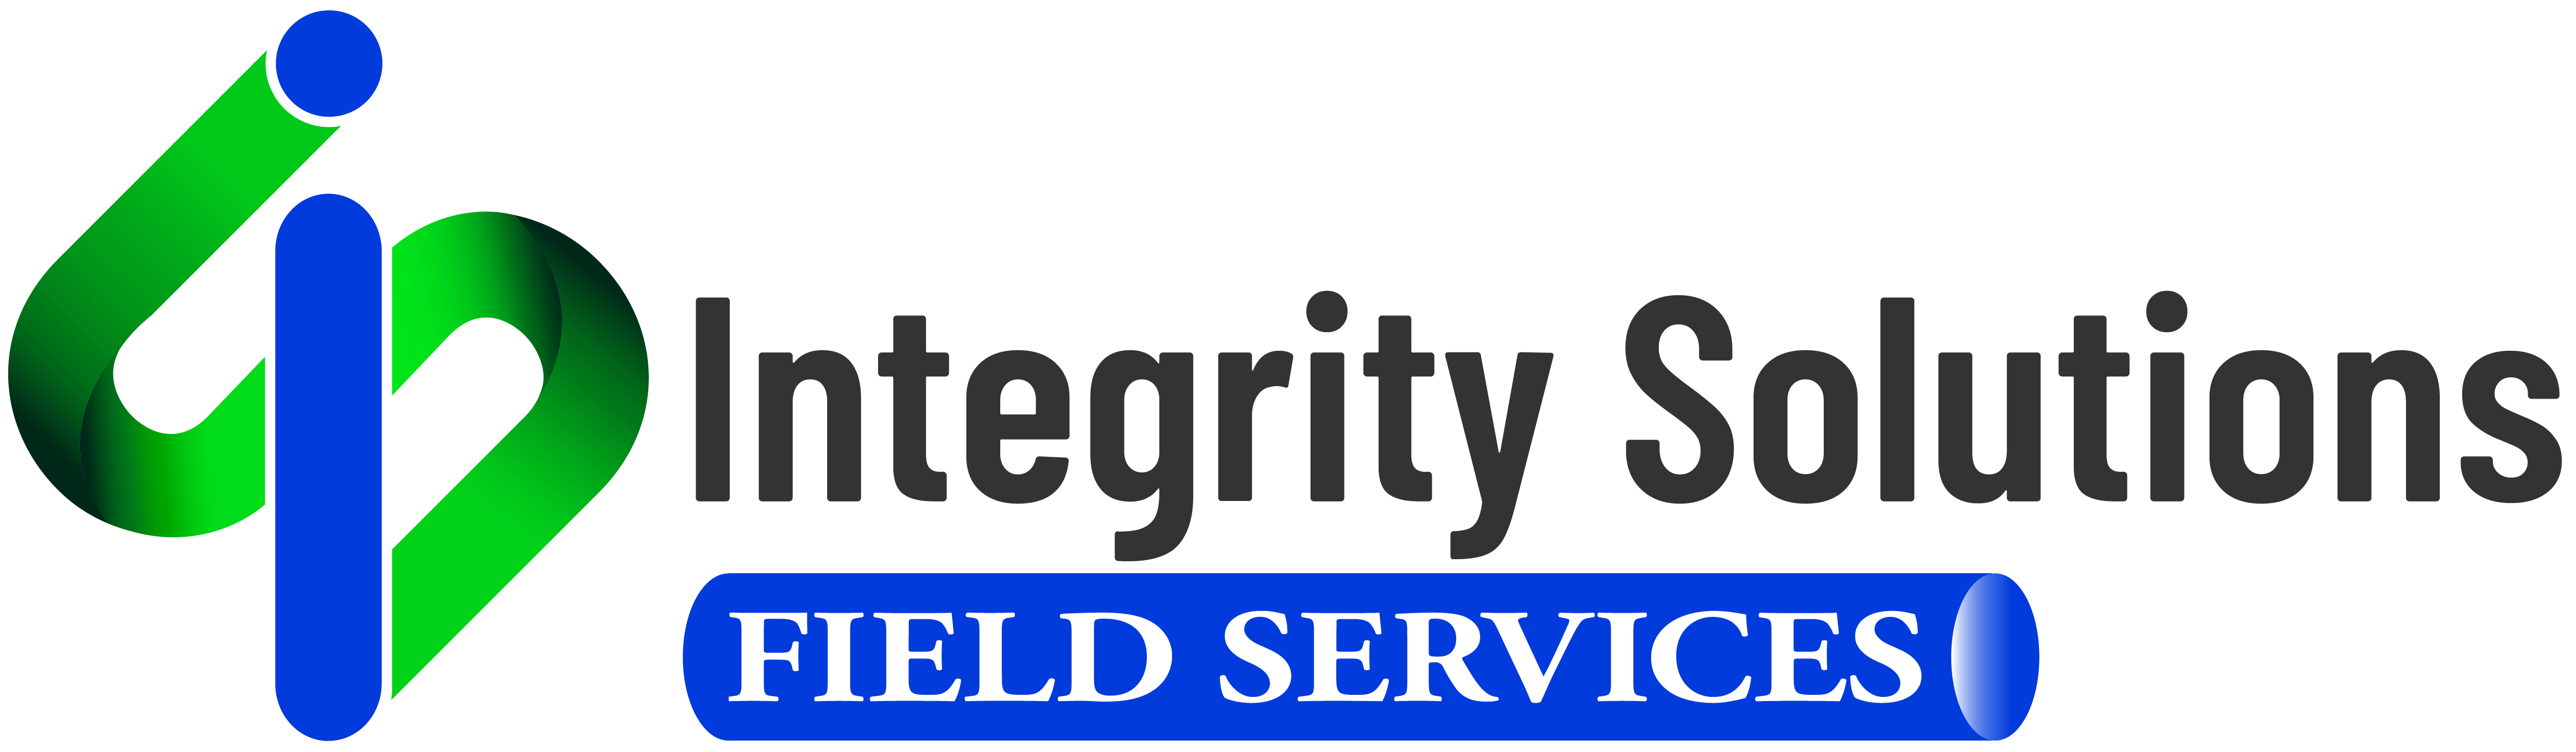 Integrity Solutions Field Services updated logo (2021)